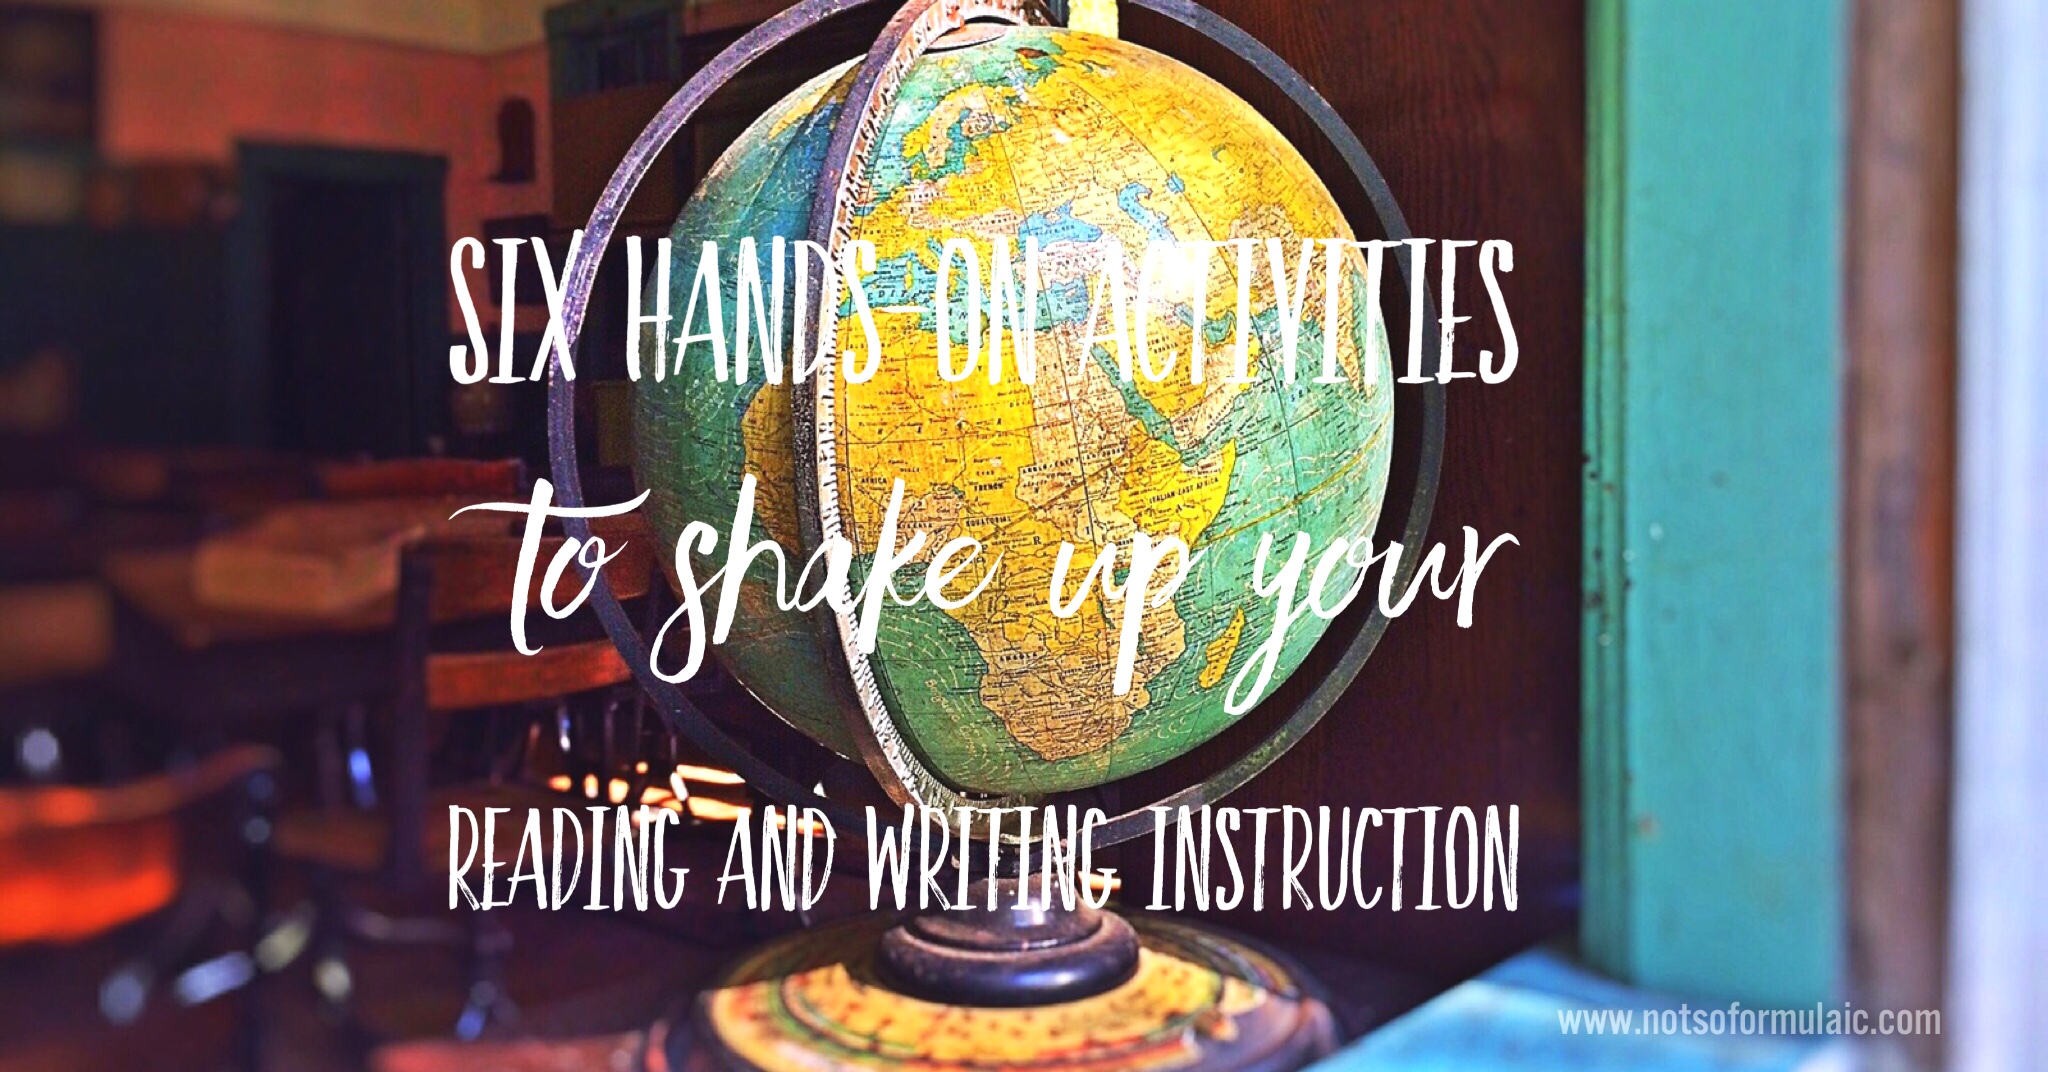 Six activities to shake up your reading and writing instruction